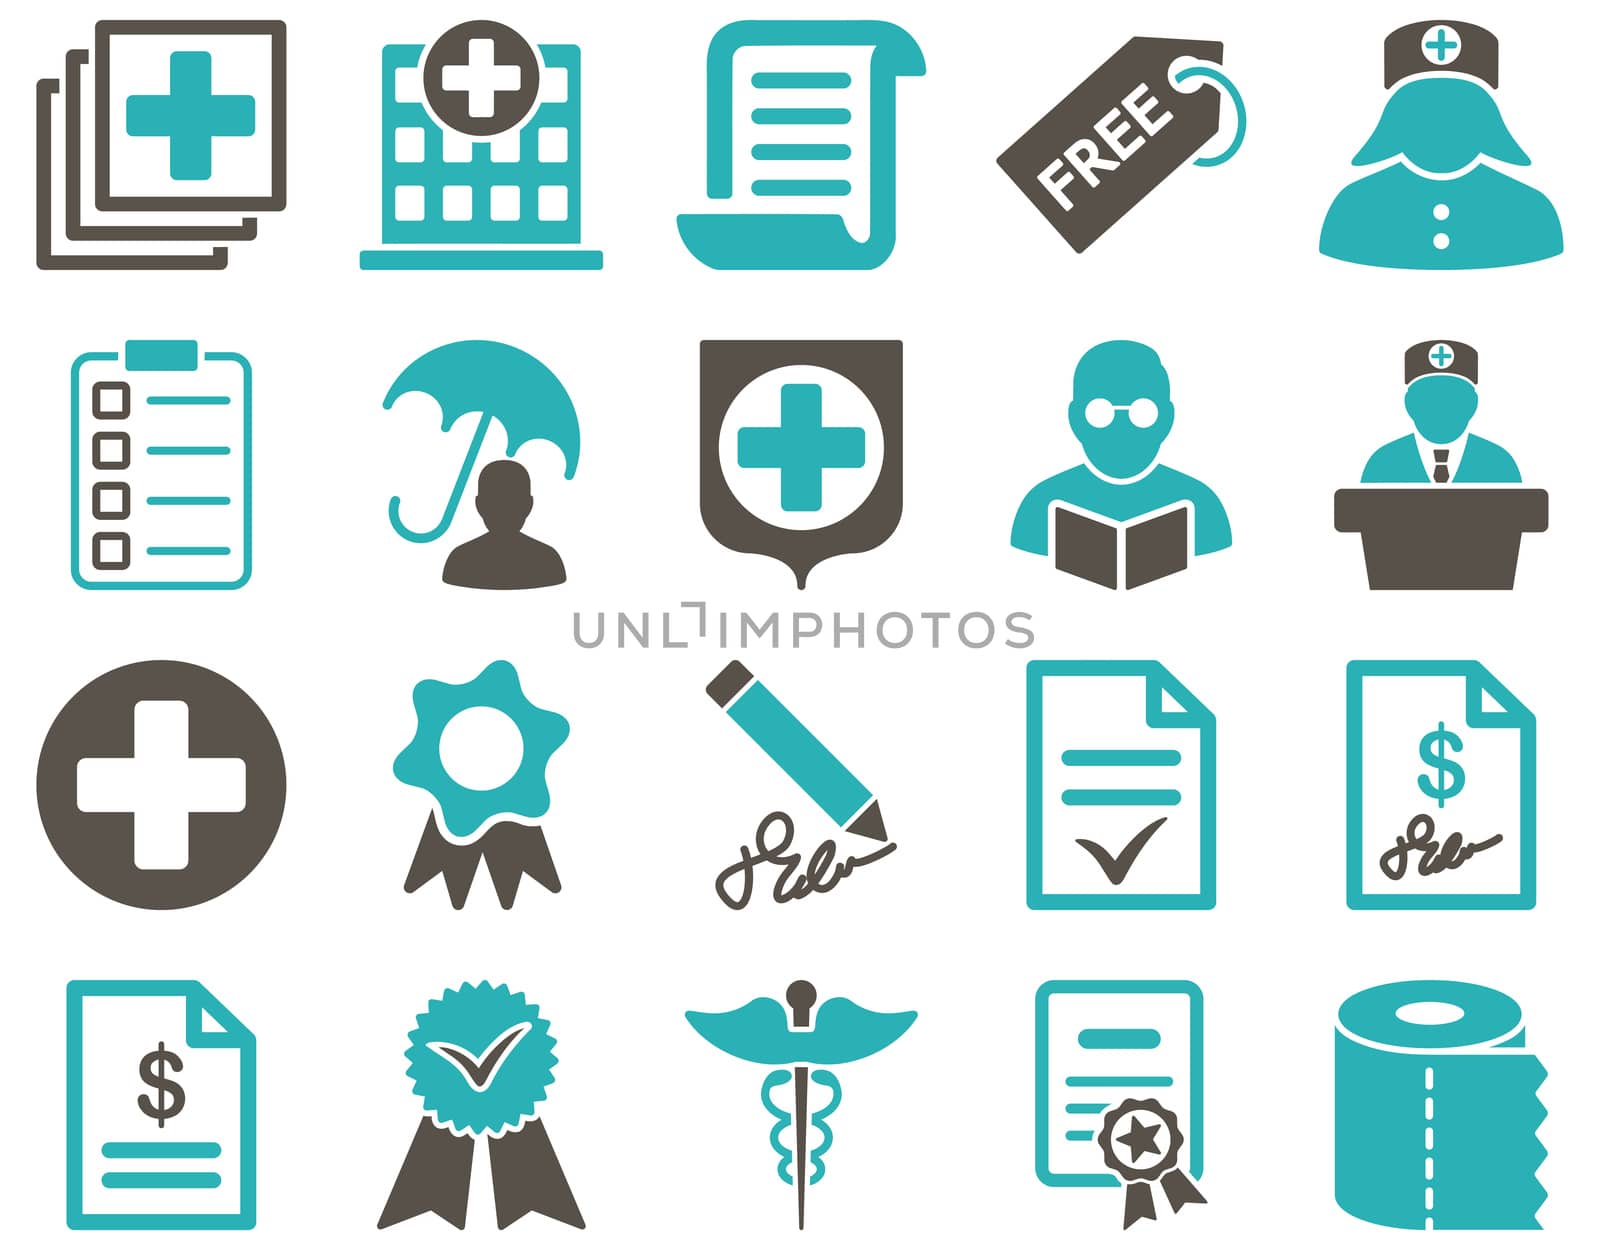 Medical icon set. Style: bicolor icons drawn with grey and cyan colors on a white background.